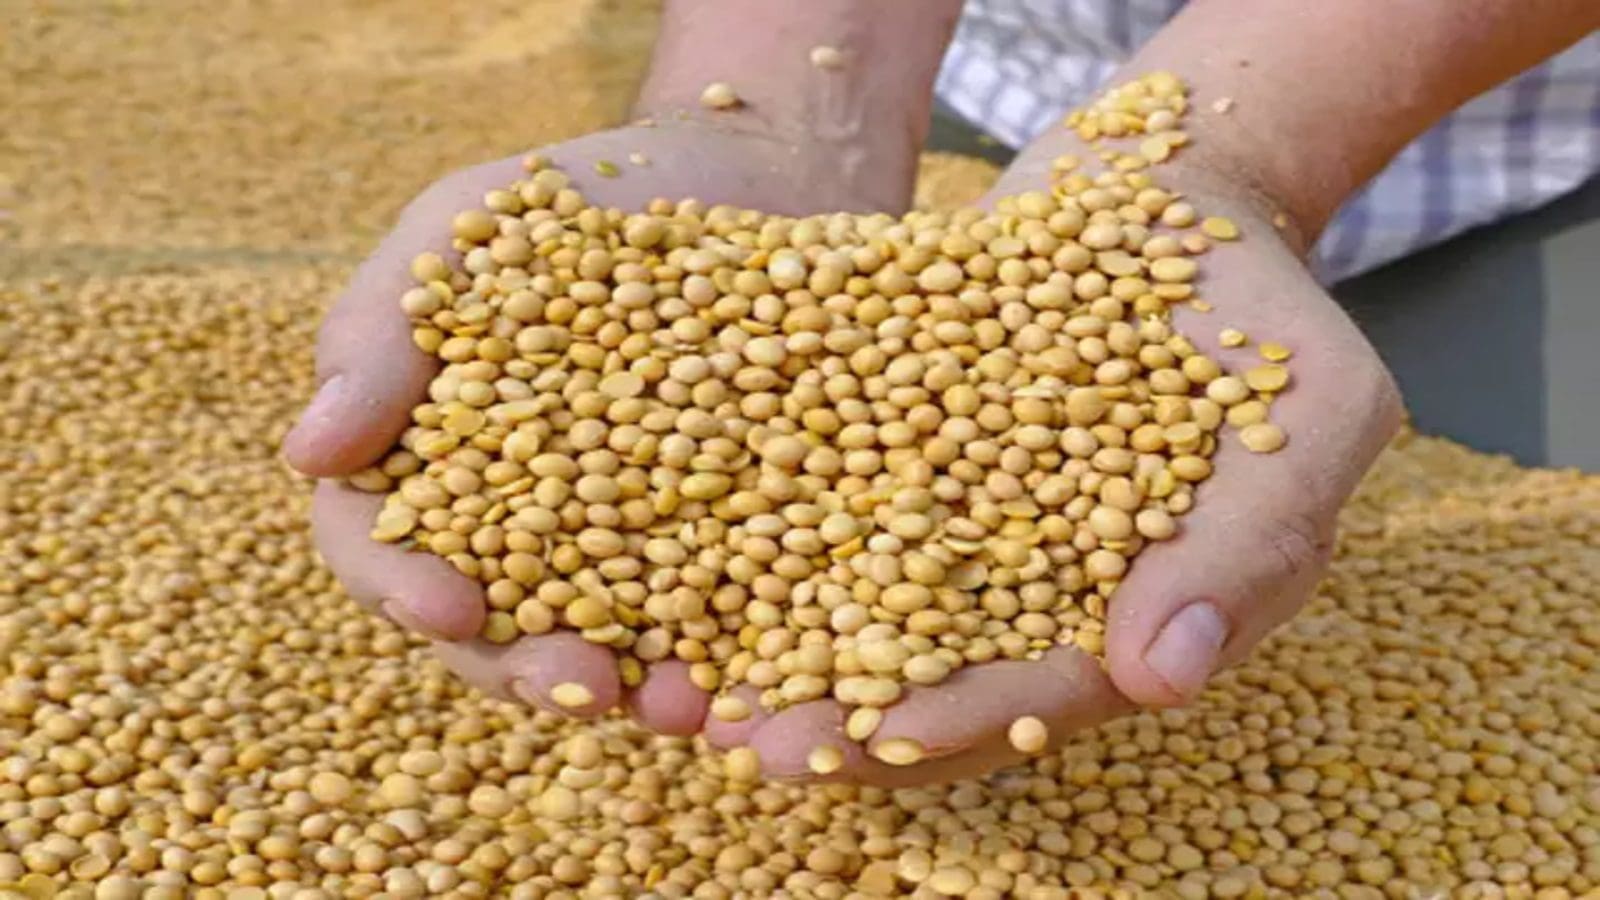 China expands its soybean hectarage to 10.6 million as it strives to achieve self-sufficiency